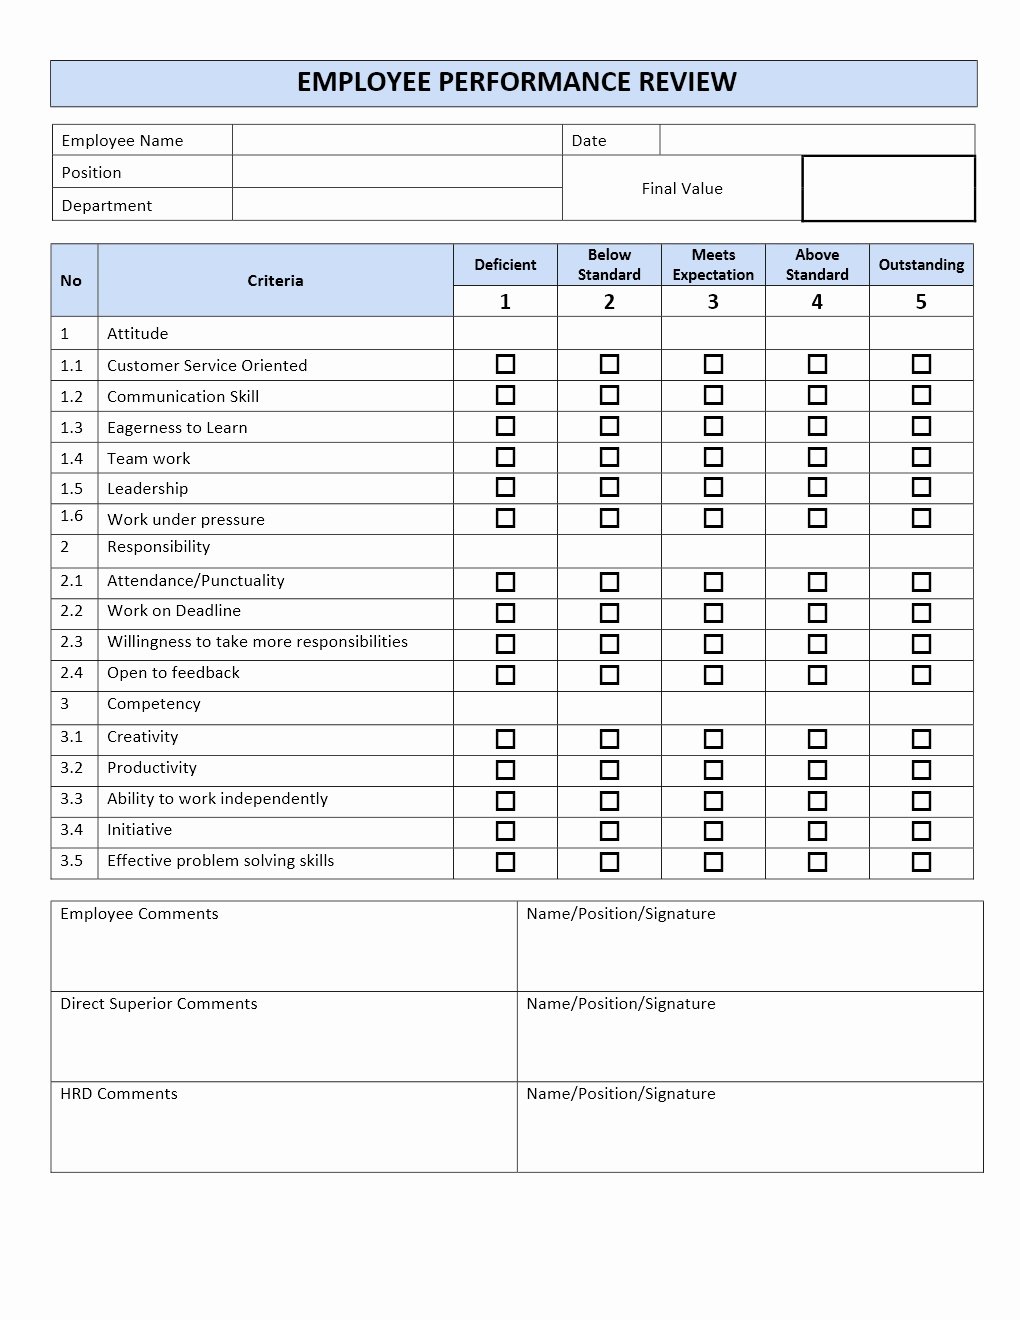 Employee Performance Review Template Pdf Elegant Employee Performance Review form